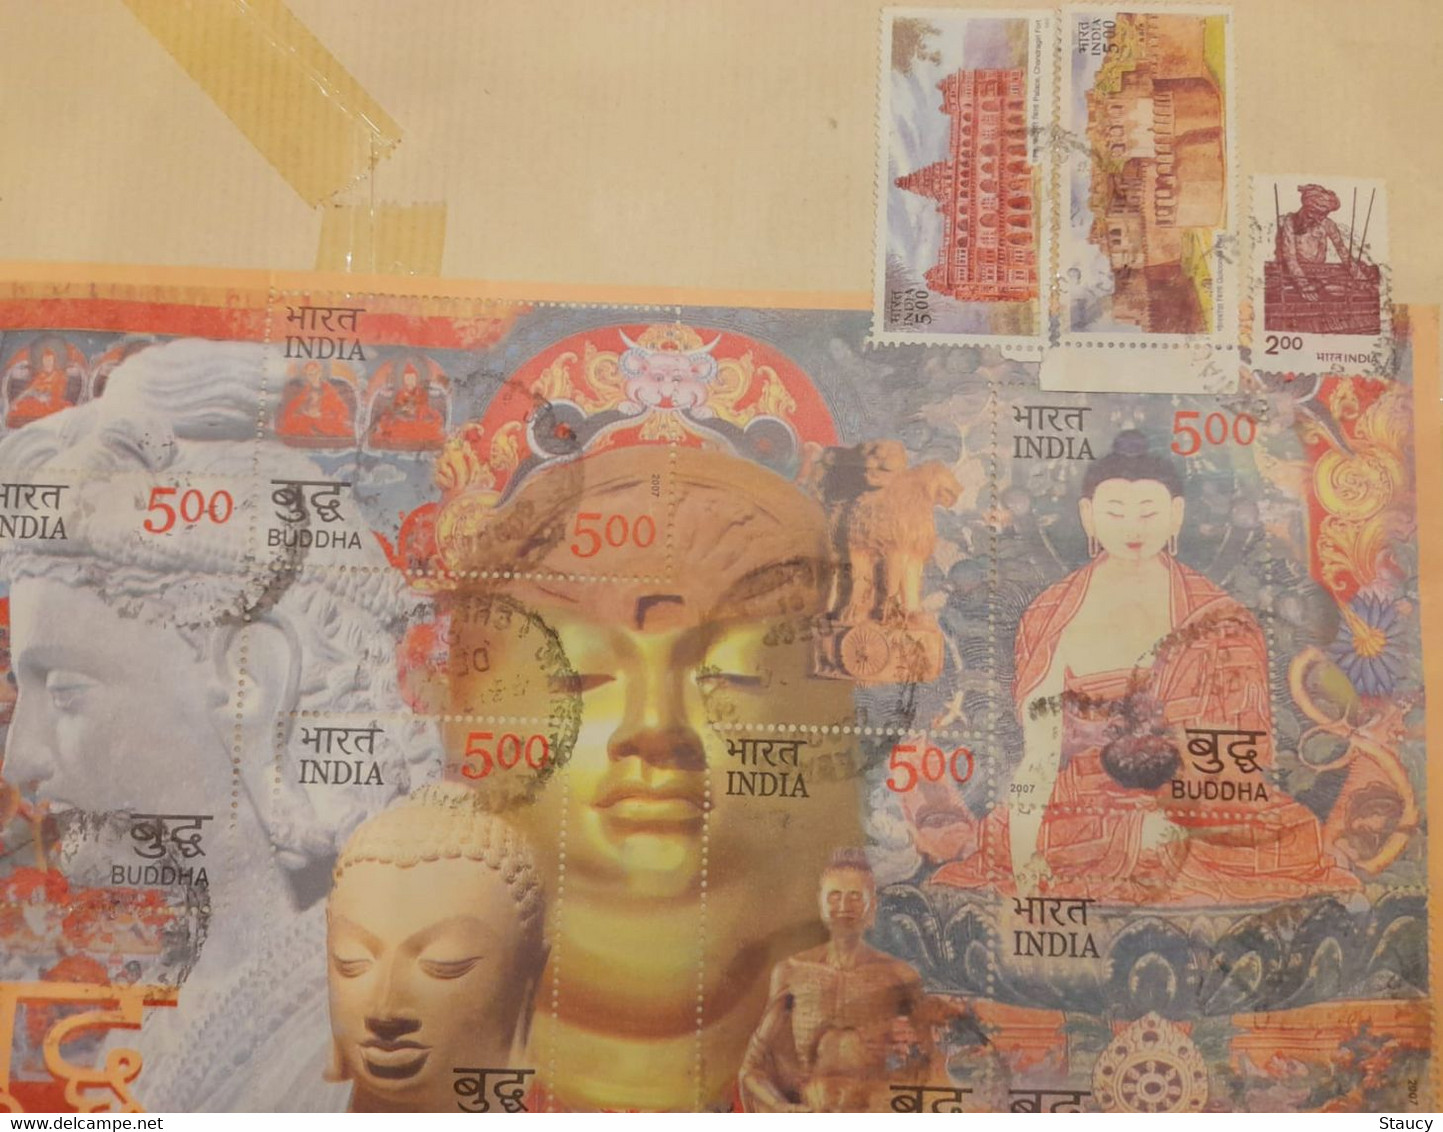 INDIA 2007 2550 YEARS OF MAHAPARINIRVANA OF THE BUDDHA Miniature Sheet MS Franked On Registered Speed Post Cover - Induismo